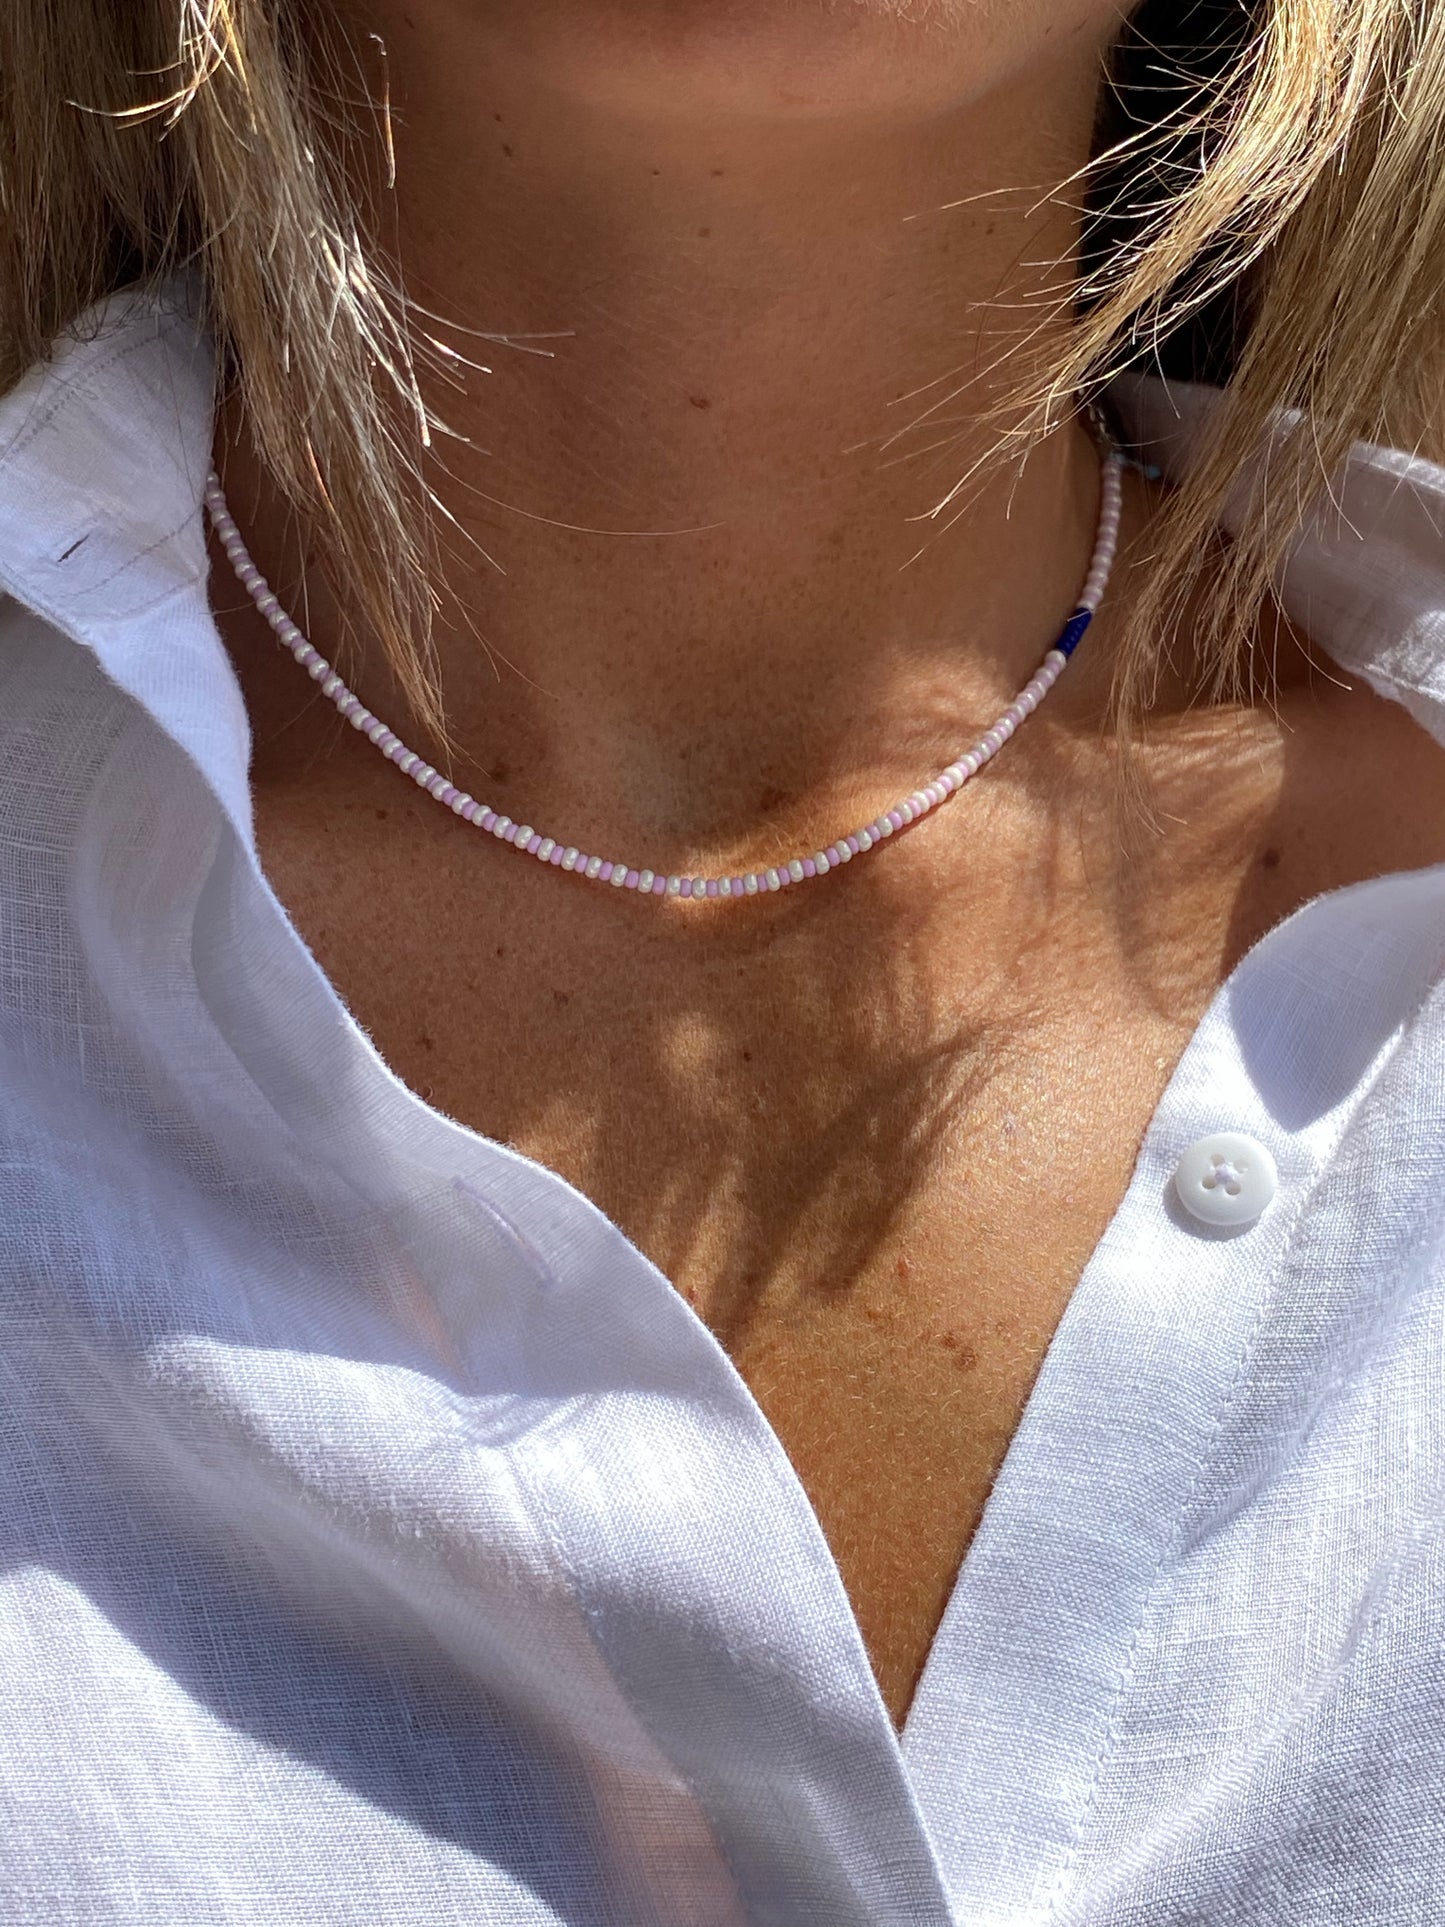 Pearlie White Sterling Necklace - sale